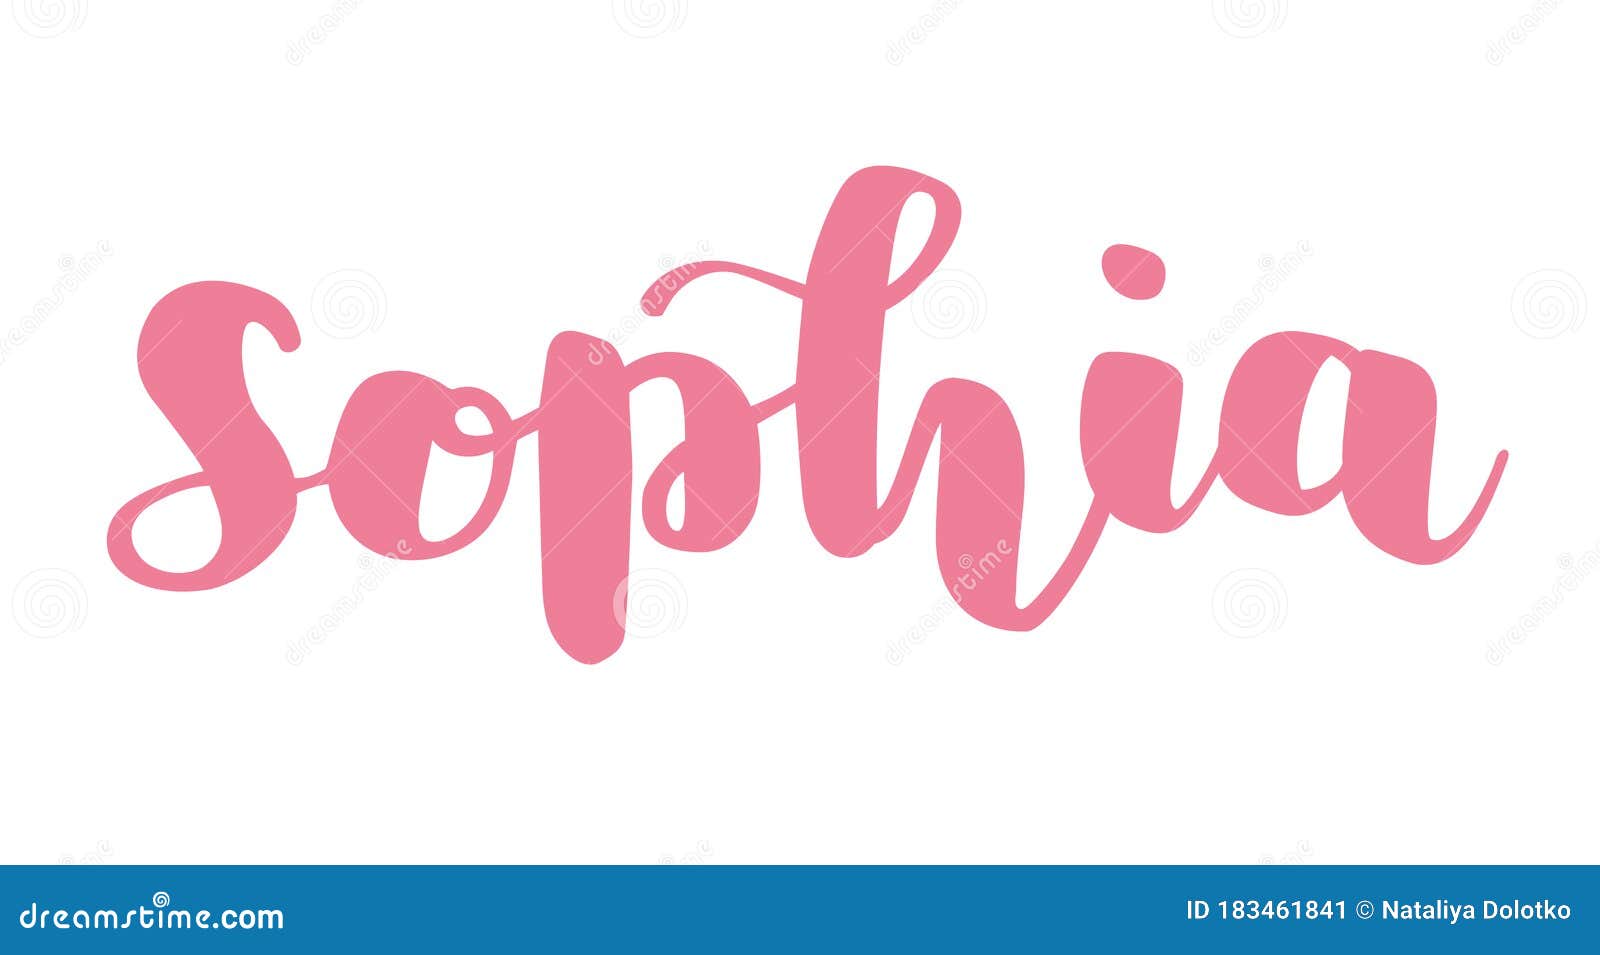 German Spelling Of The Female Name Sophia German Lettering Stock Vector Illustration Of Wall Abstract